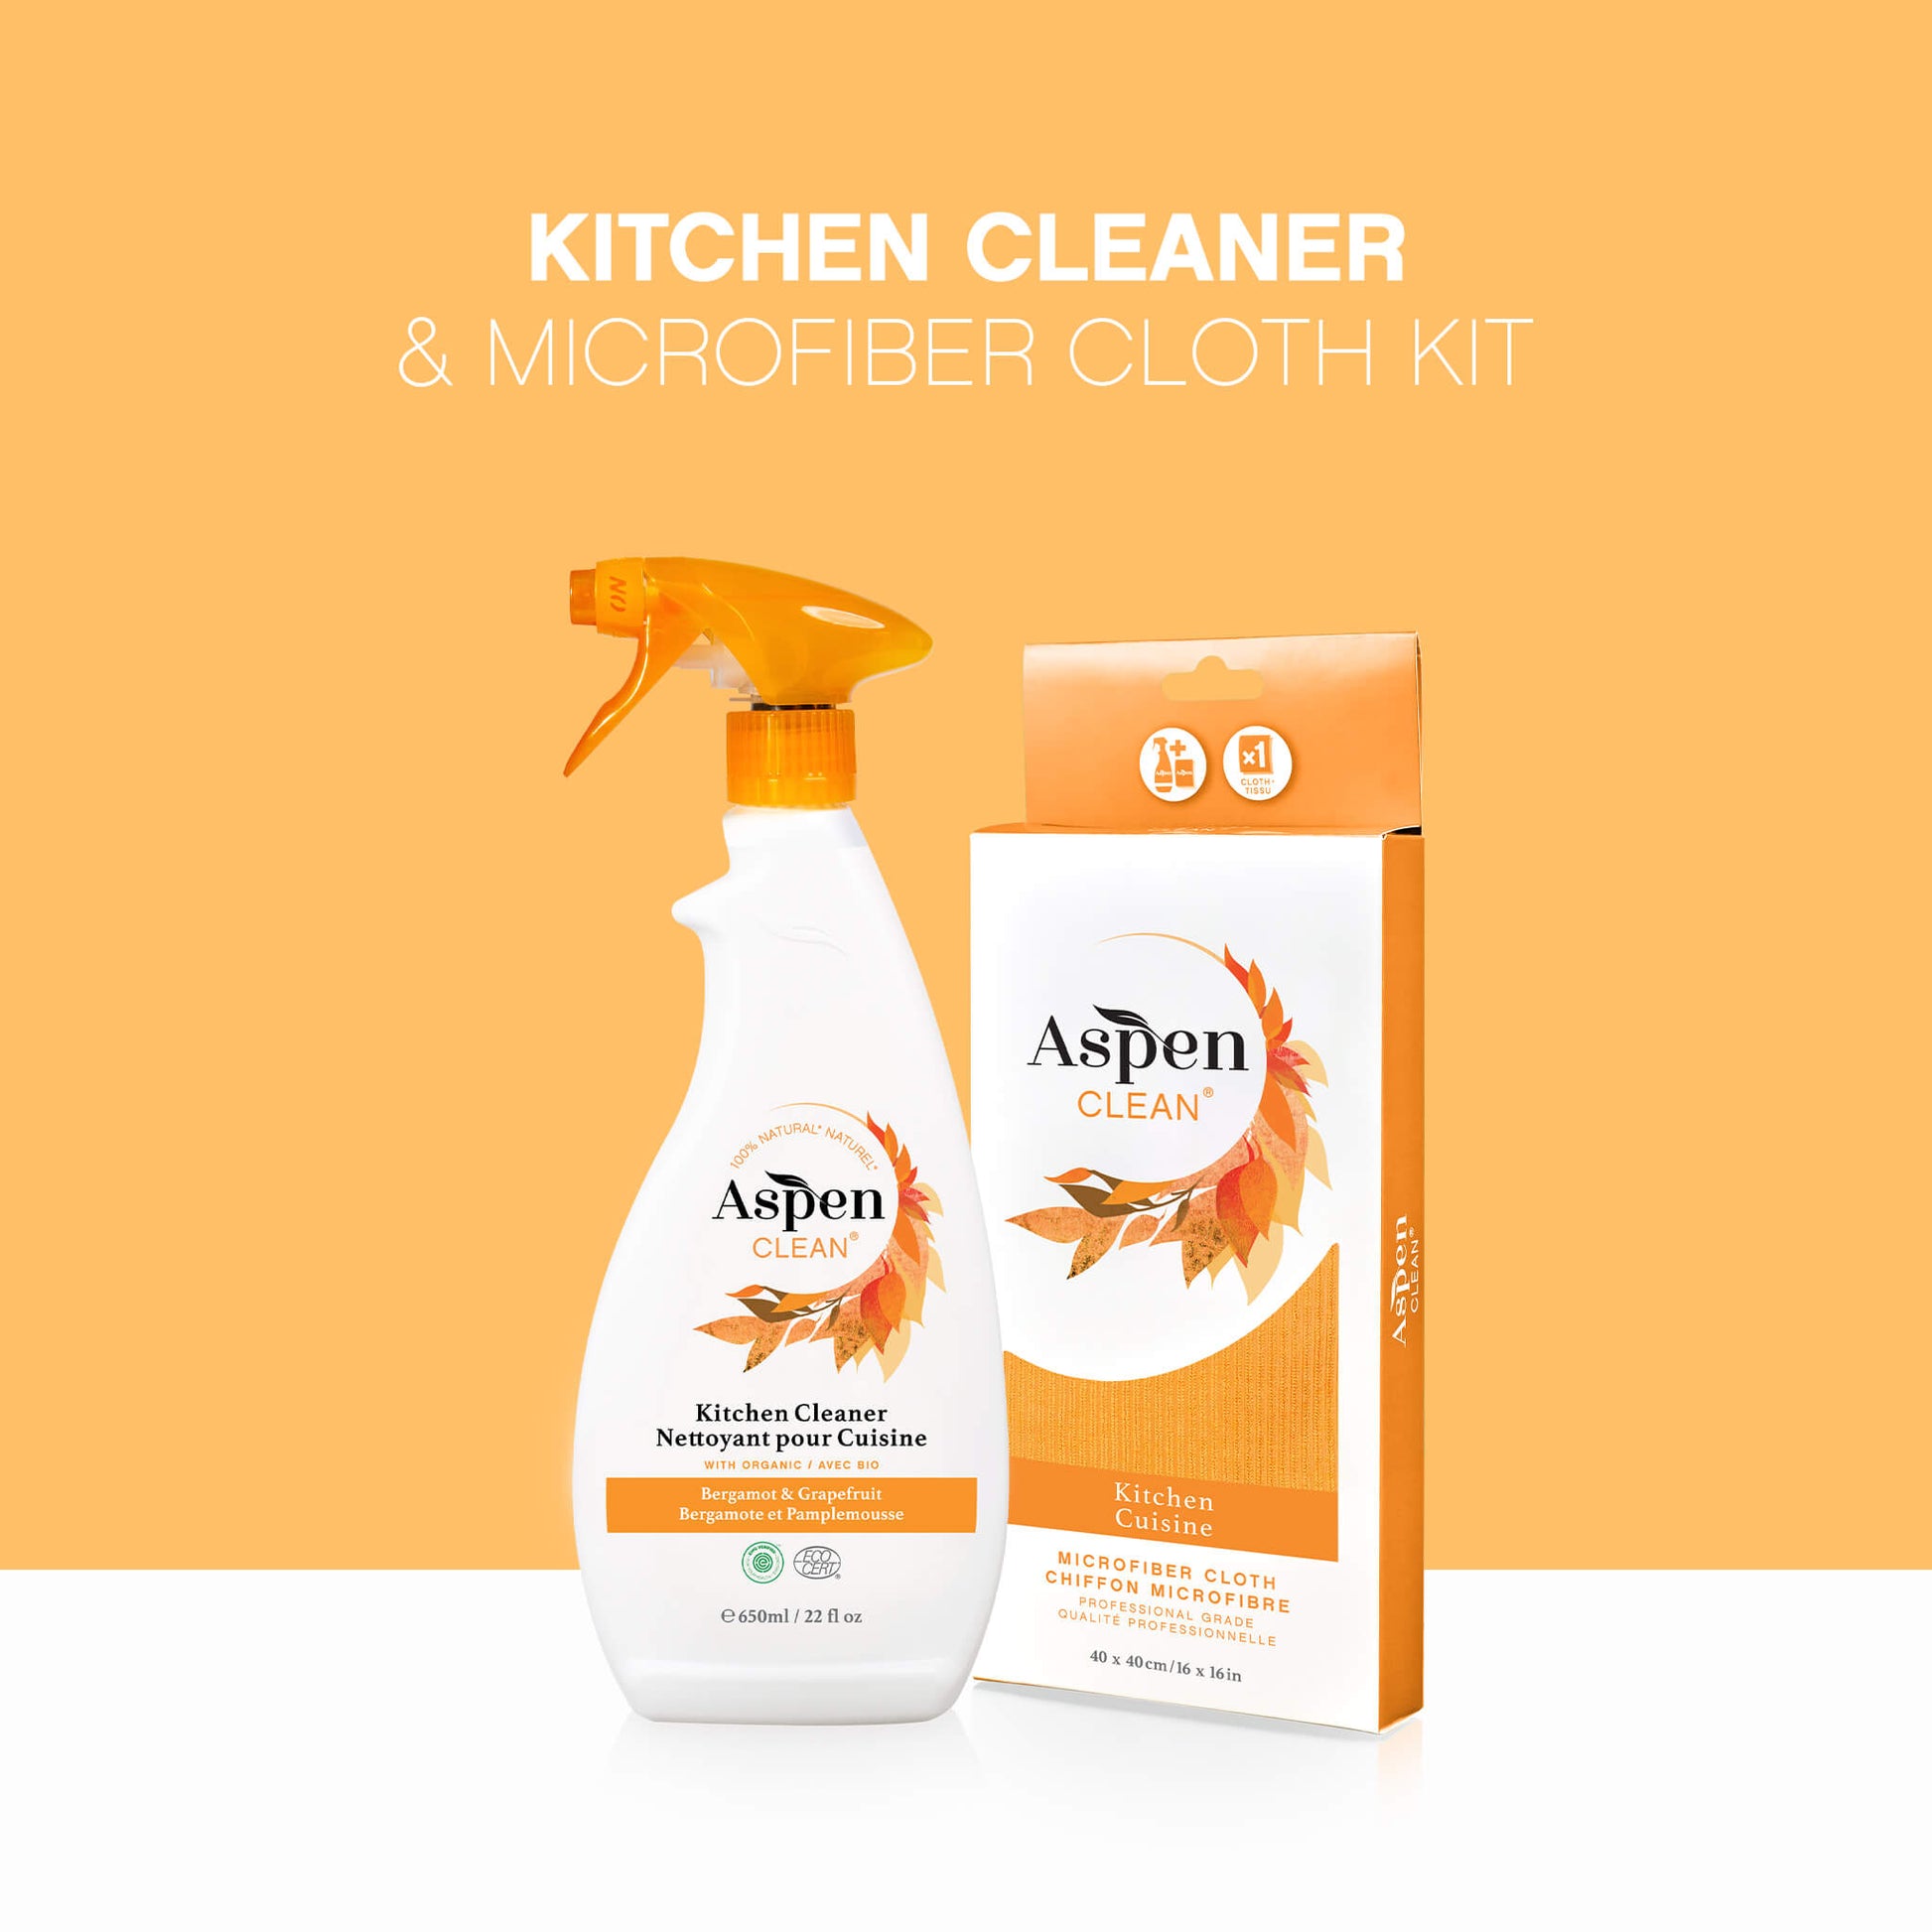 Kitchen Cleaner and Microfiber Cloth Kit